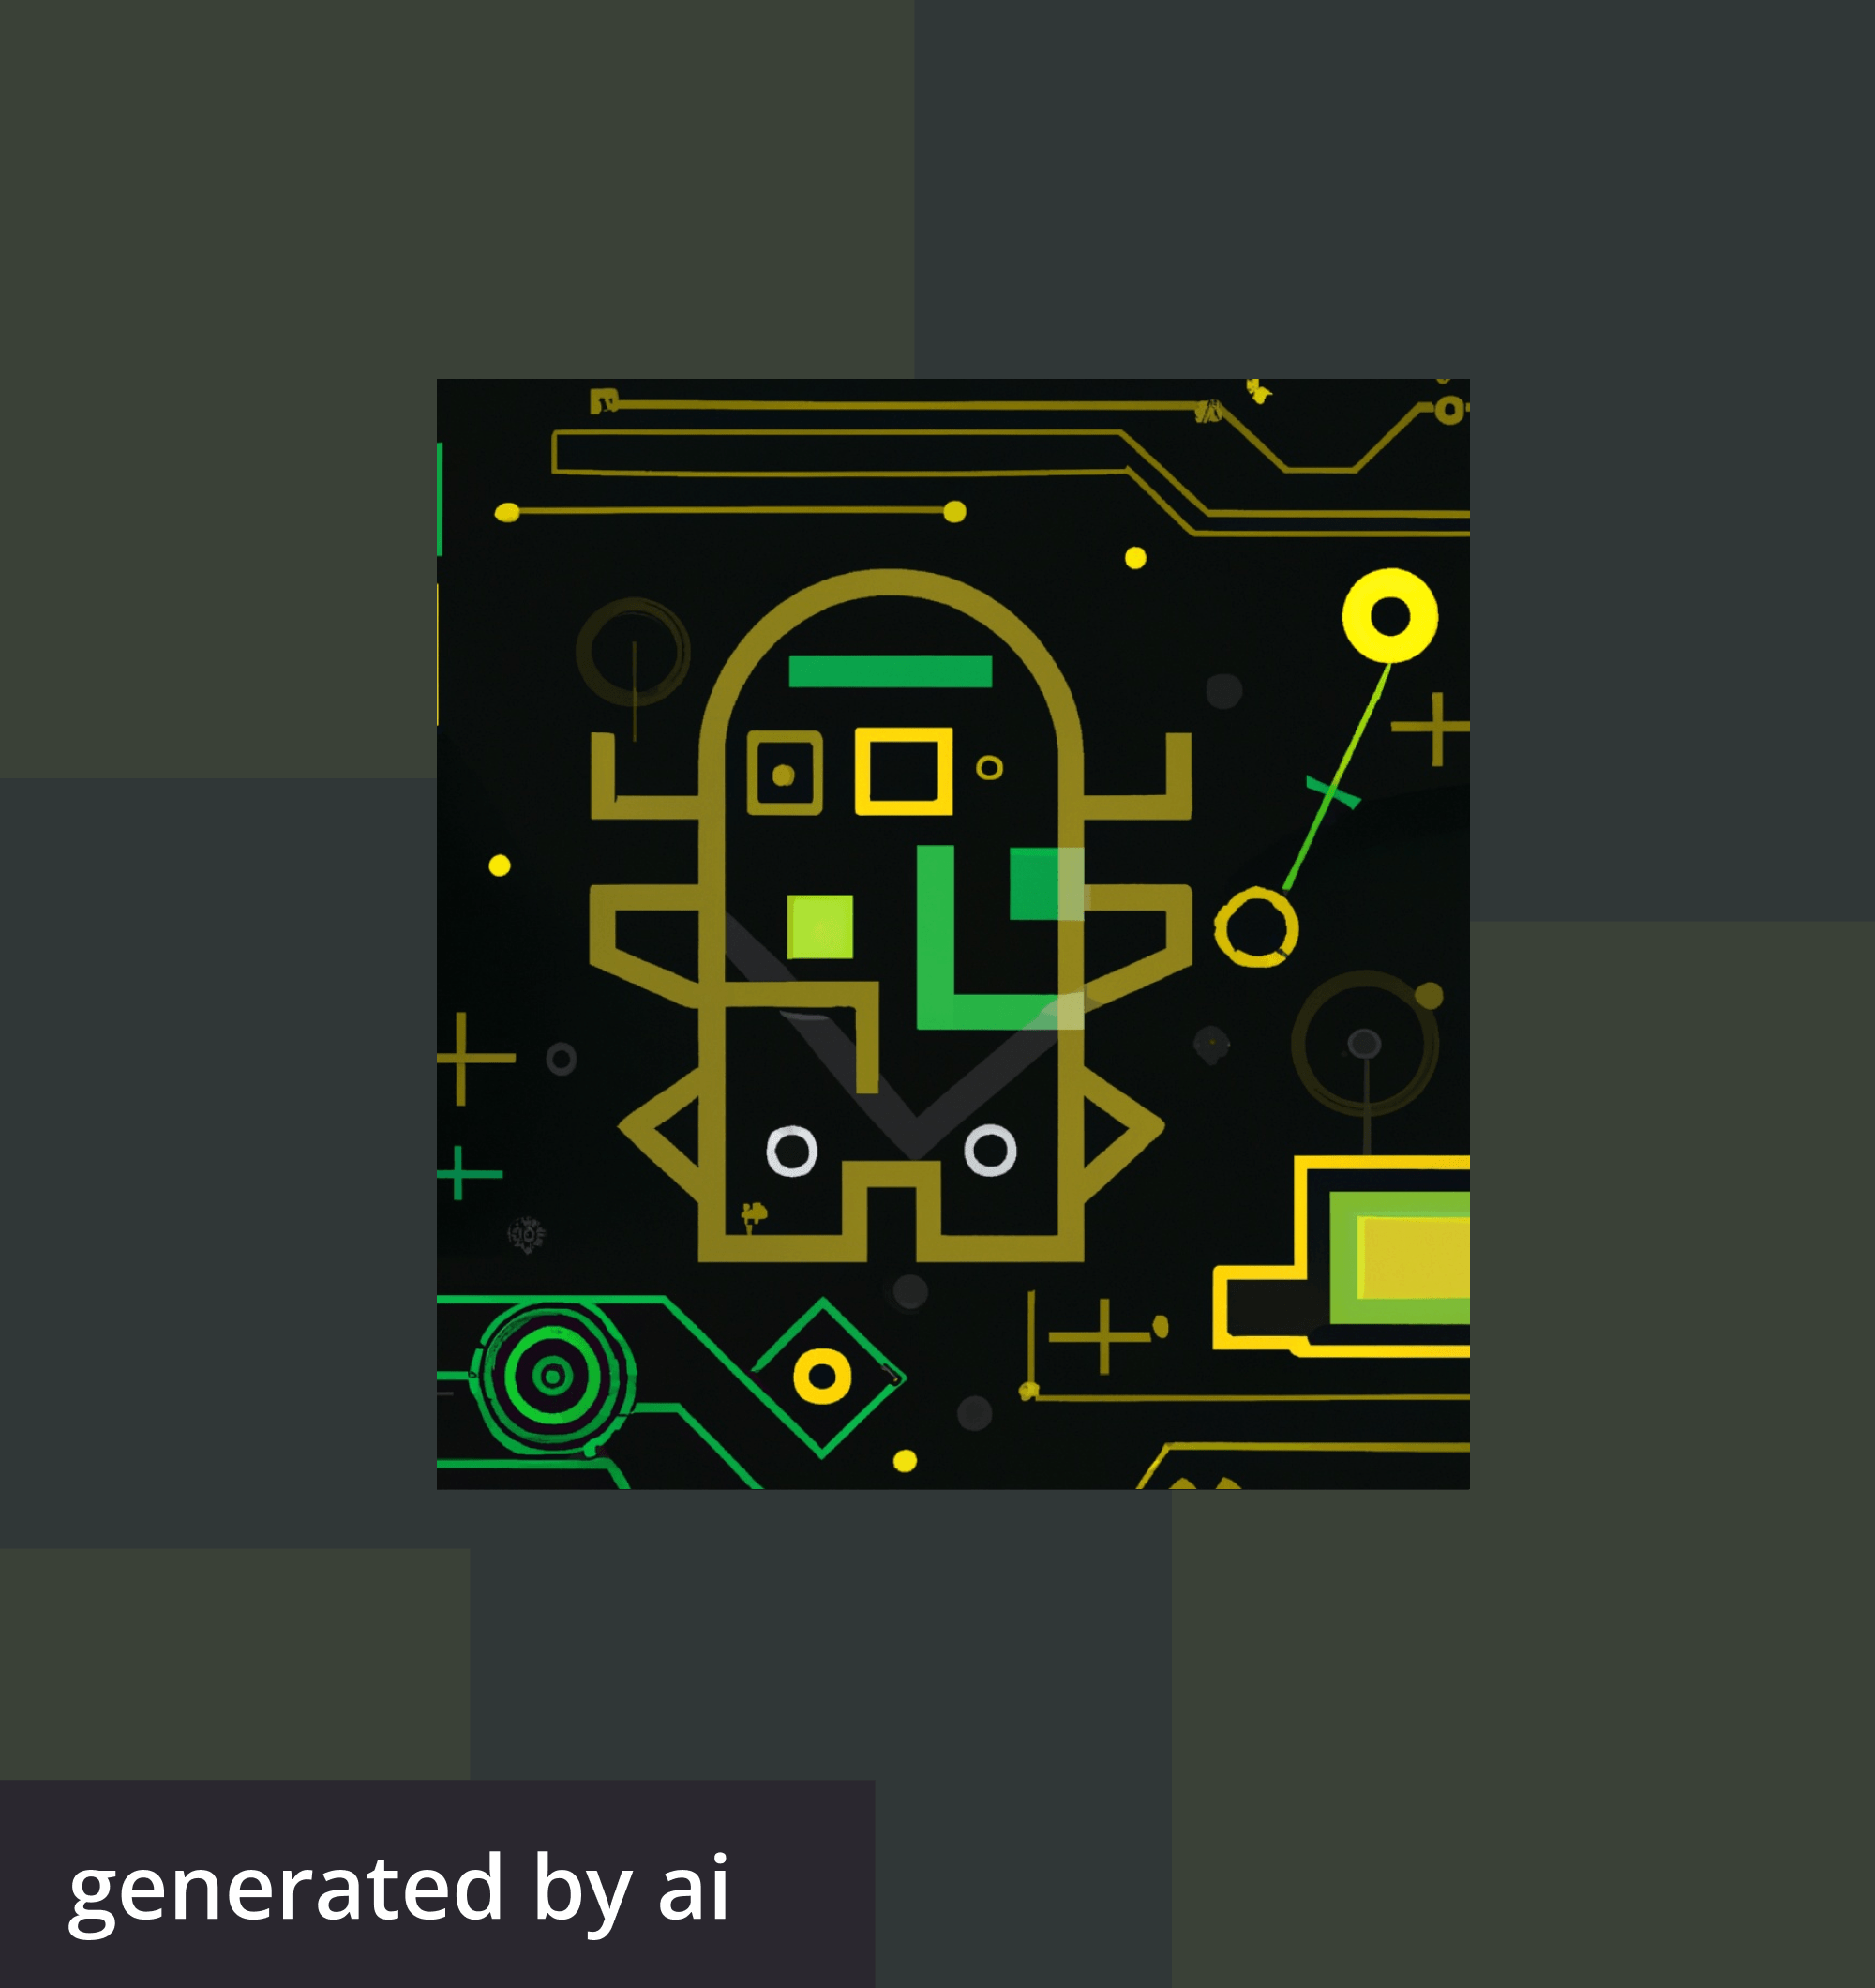 An AI-generated image with abstract shapes and lines in green and yellow